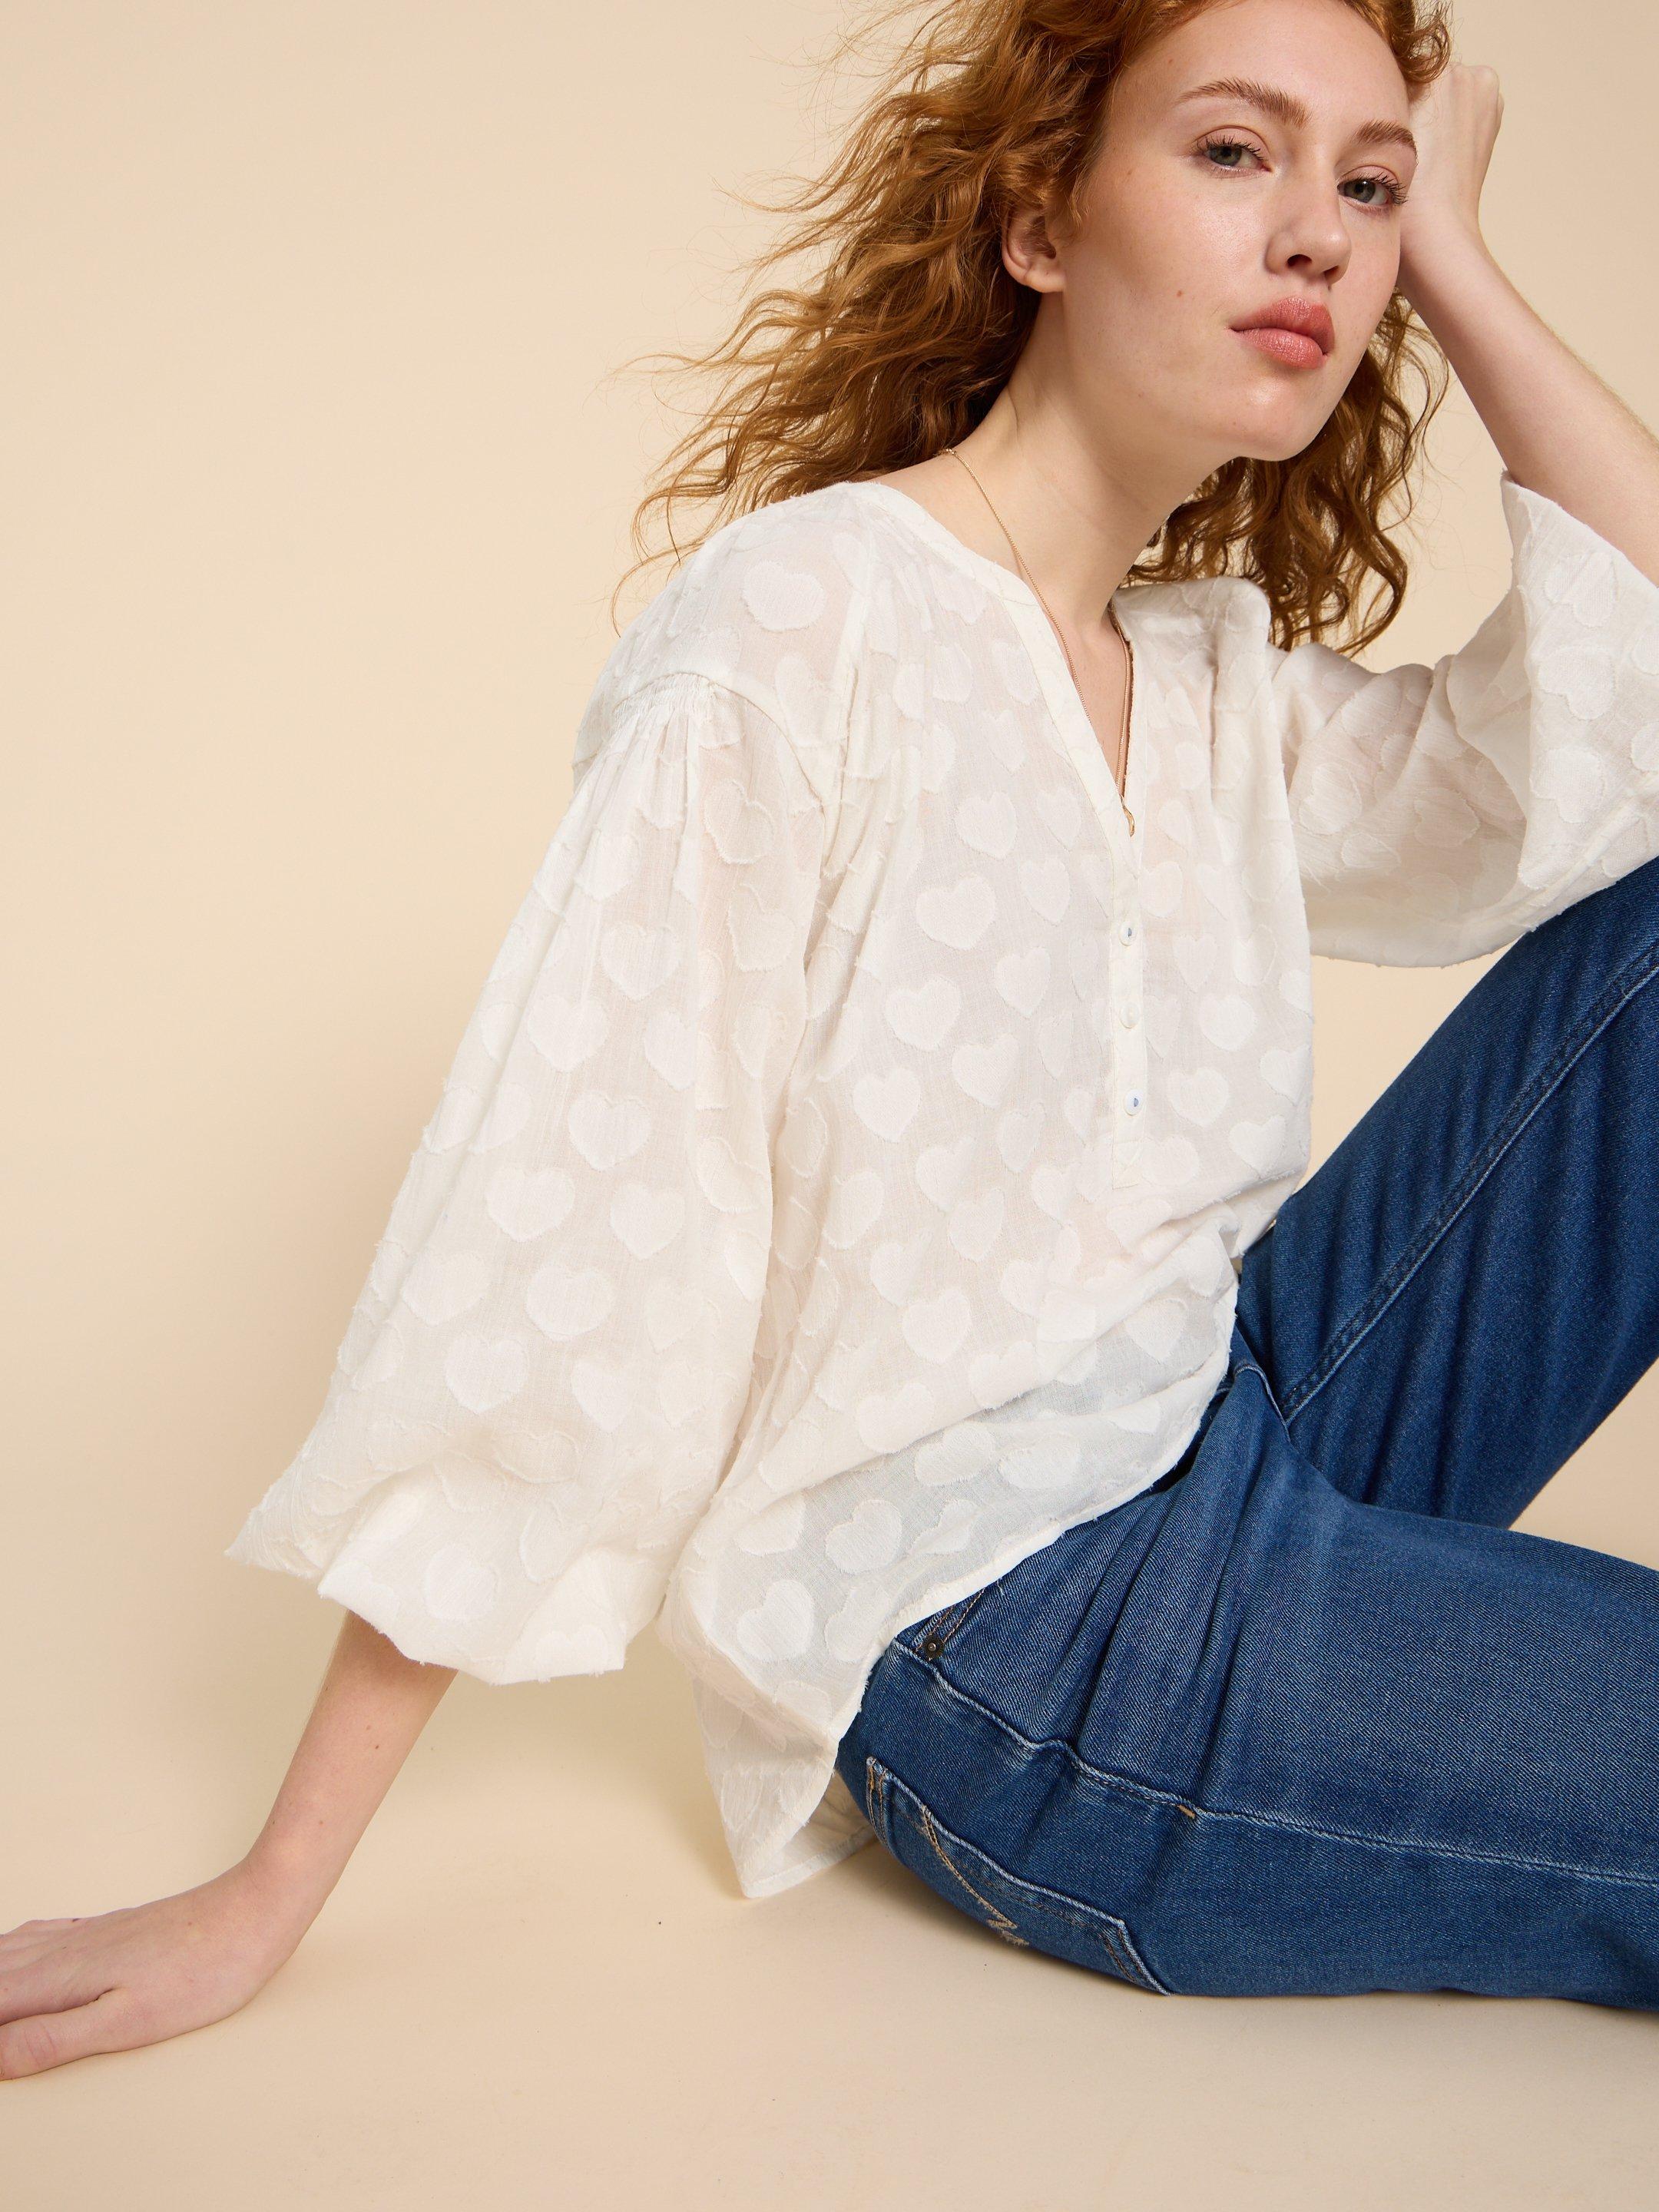 Josie Heart Jacquard Top in PALE IVORY - LIFESTYLE